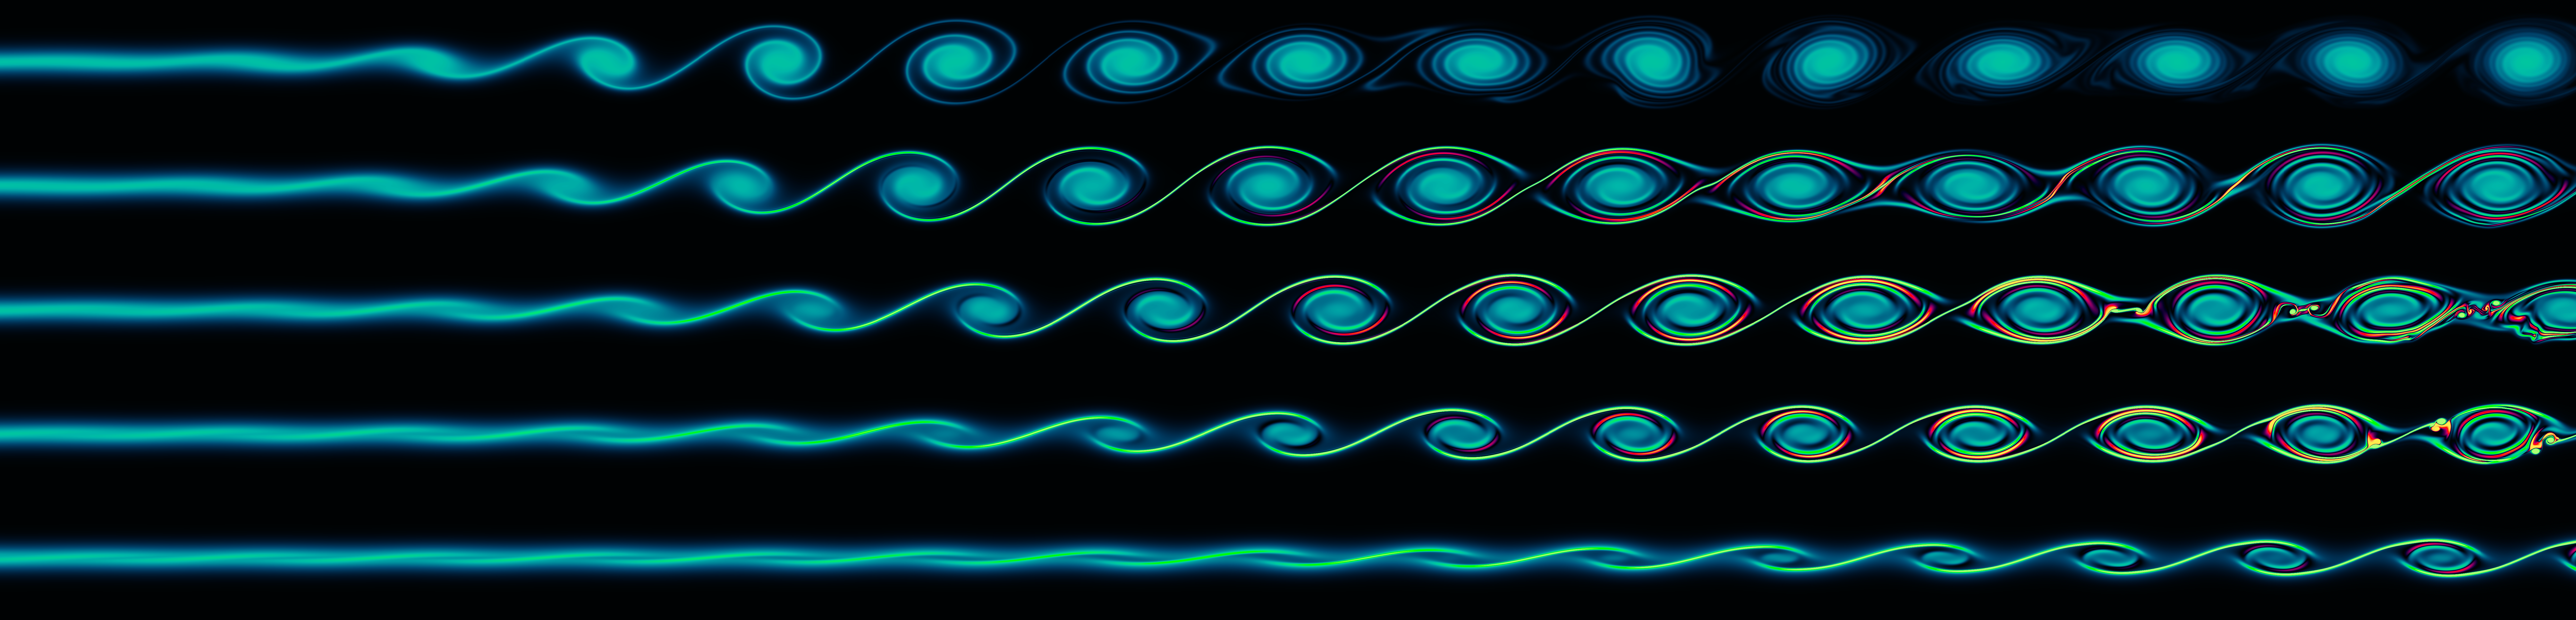 This image is a composite of five vorticity time series from simulations of stratified shear layers with increasing stratification. Each pixel column corresponds to a single time step from each simulation. (The image was created using a cmocean colormap, and was further edited for saturation and contrast using RawTherapee.)